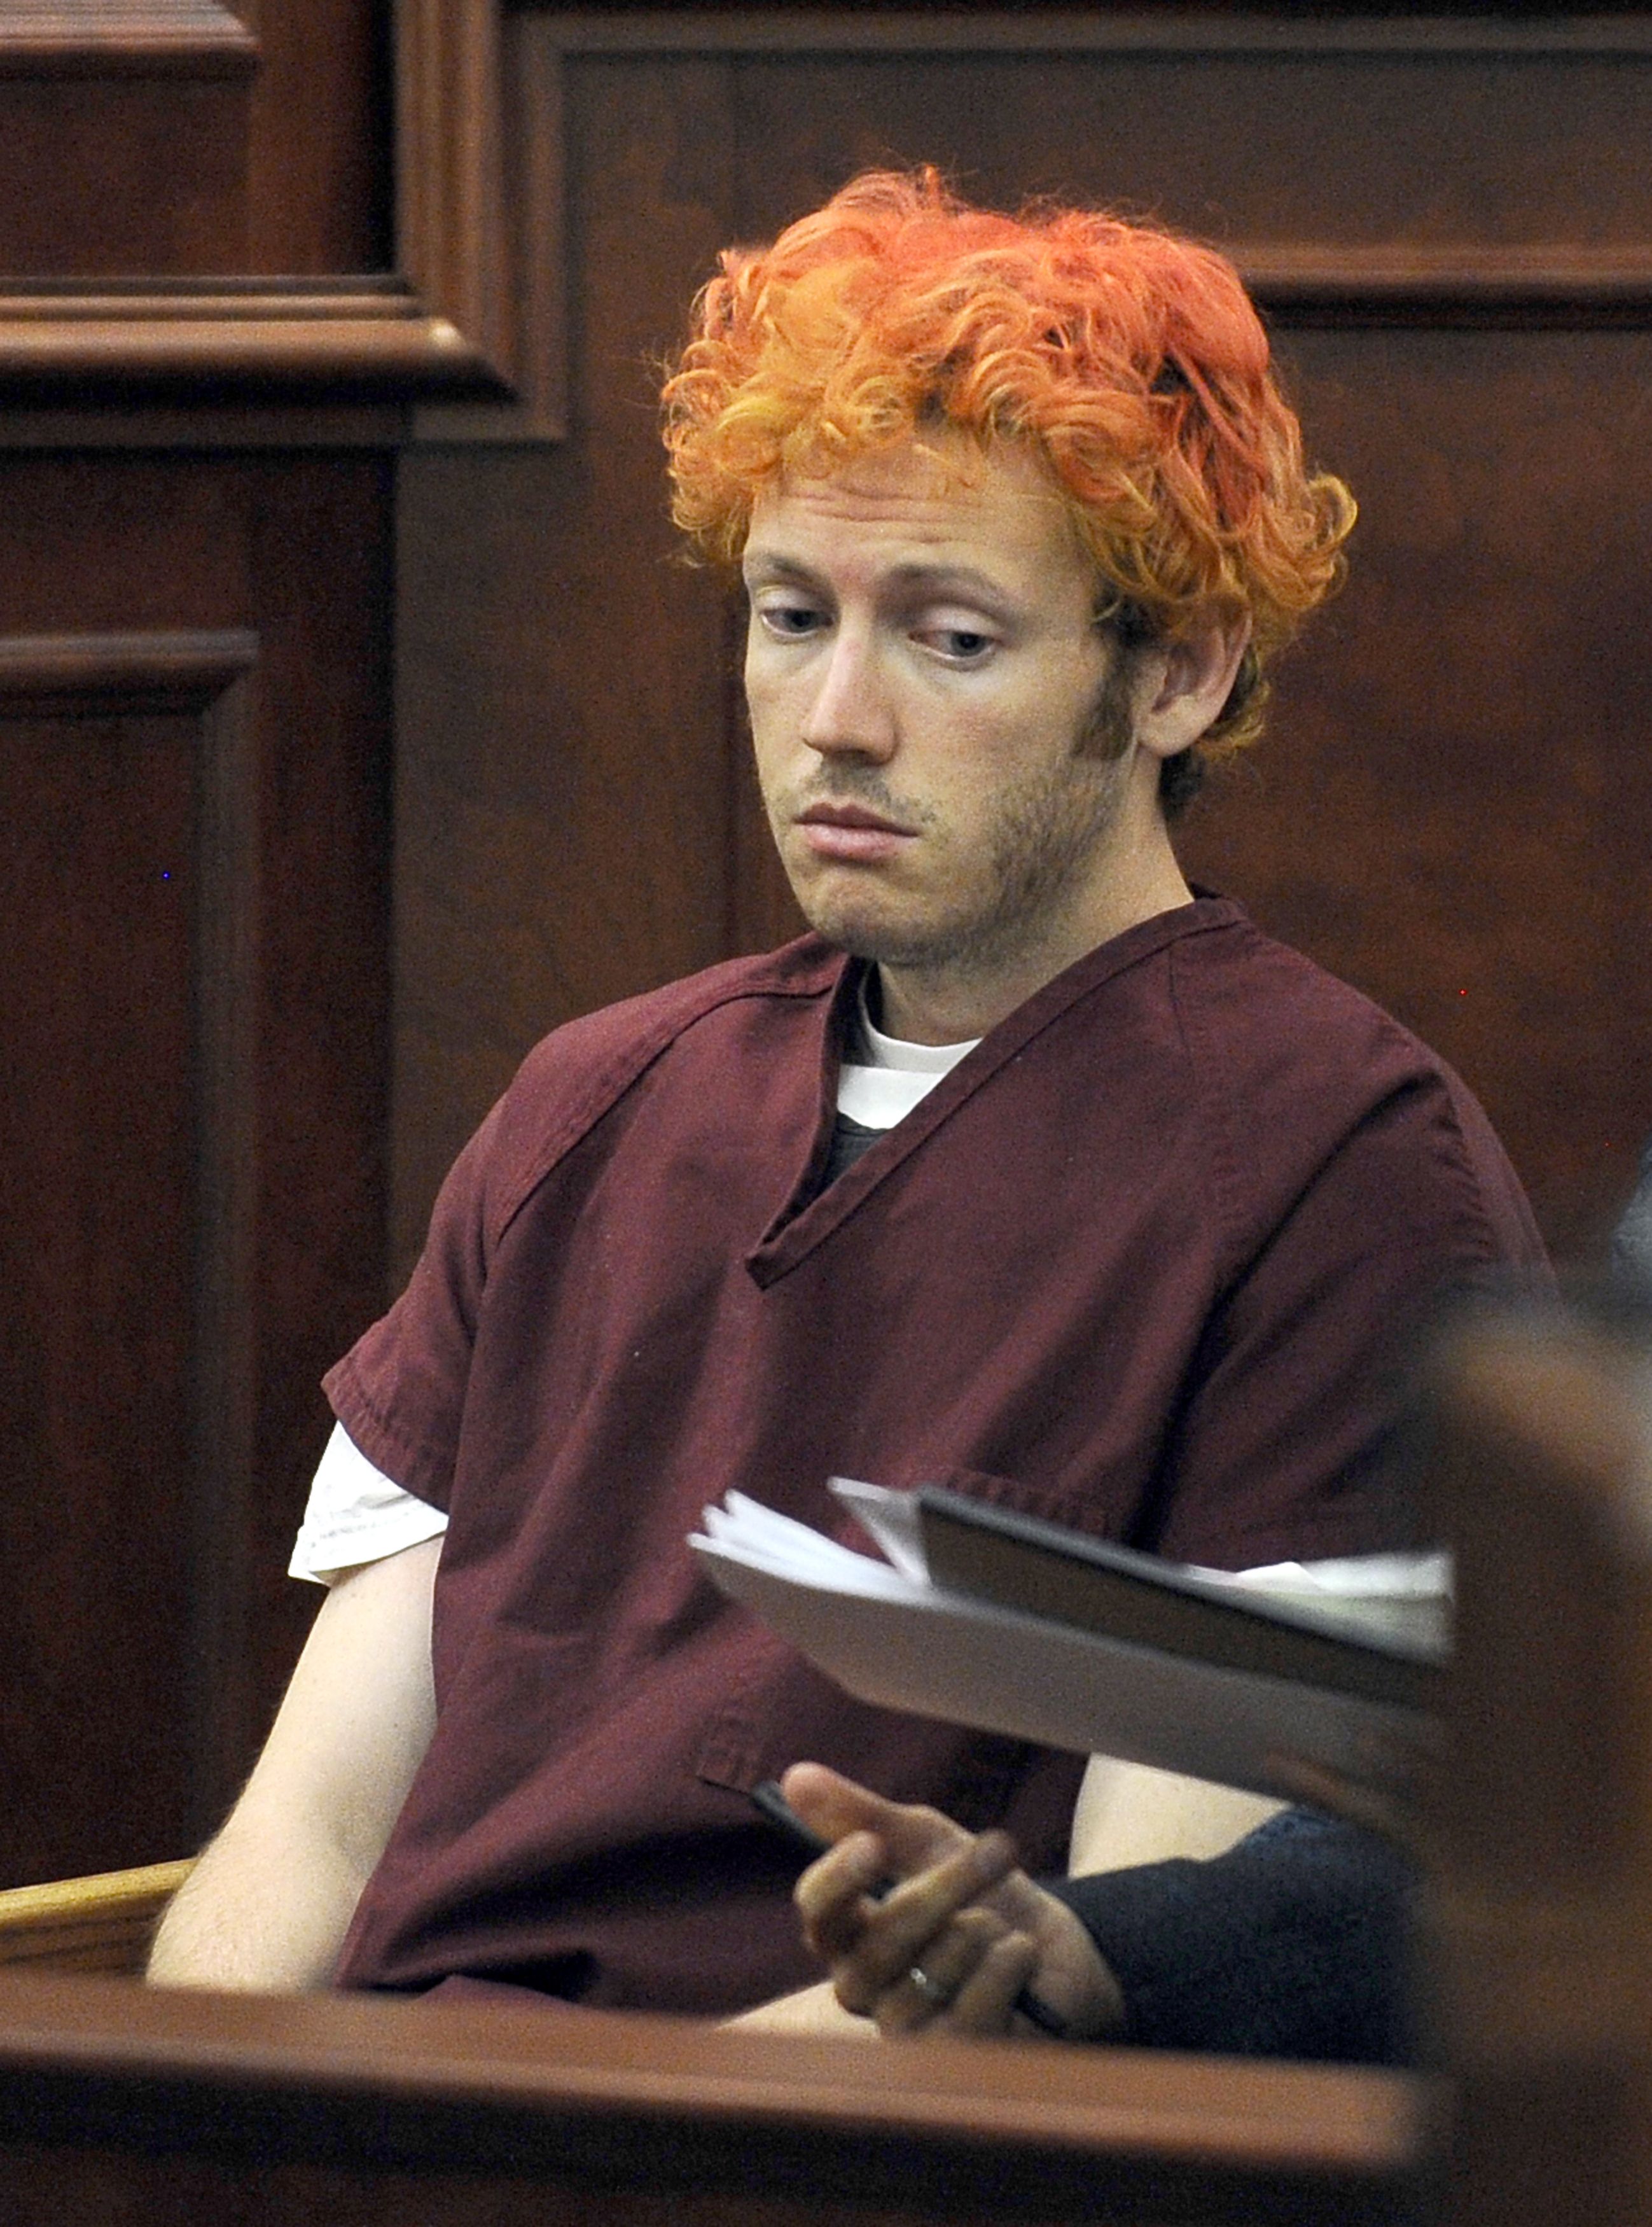 James Holmes appears in court at the Arapahoe County Justice Center July 23, 2012 in Centennial, Colorado. Holmes, 24, is accused of shooting dead 12 people and wounding 58 others at a cinema Friday in Aurora, outside Denver, as young moviegoers packed the midnight screening of the latest Batman film, 'The Dark Knight Rises.' [Xinhua] 